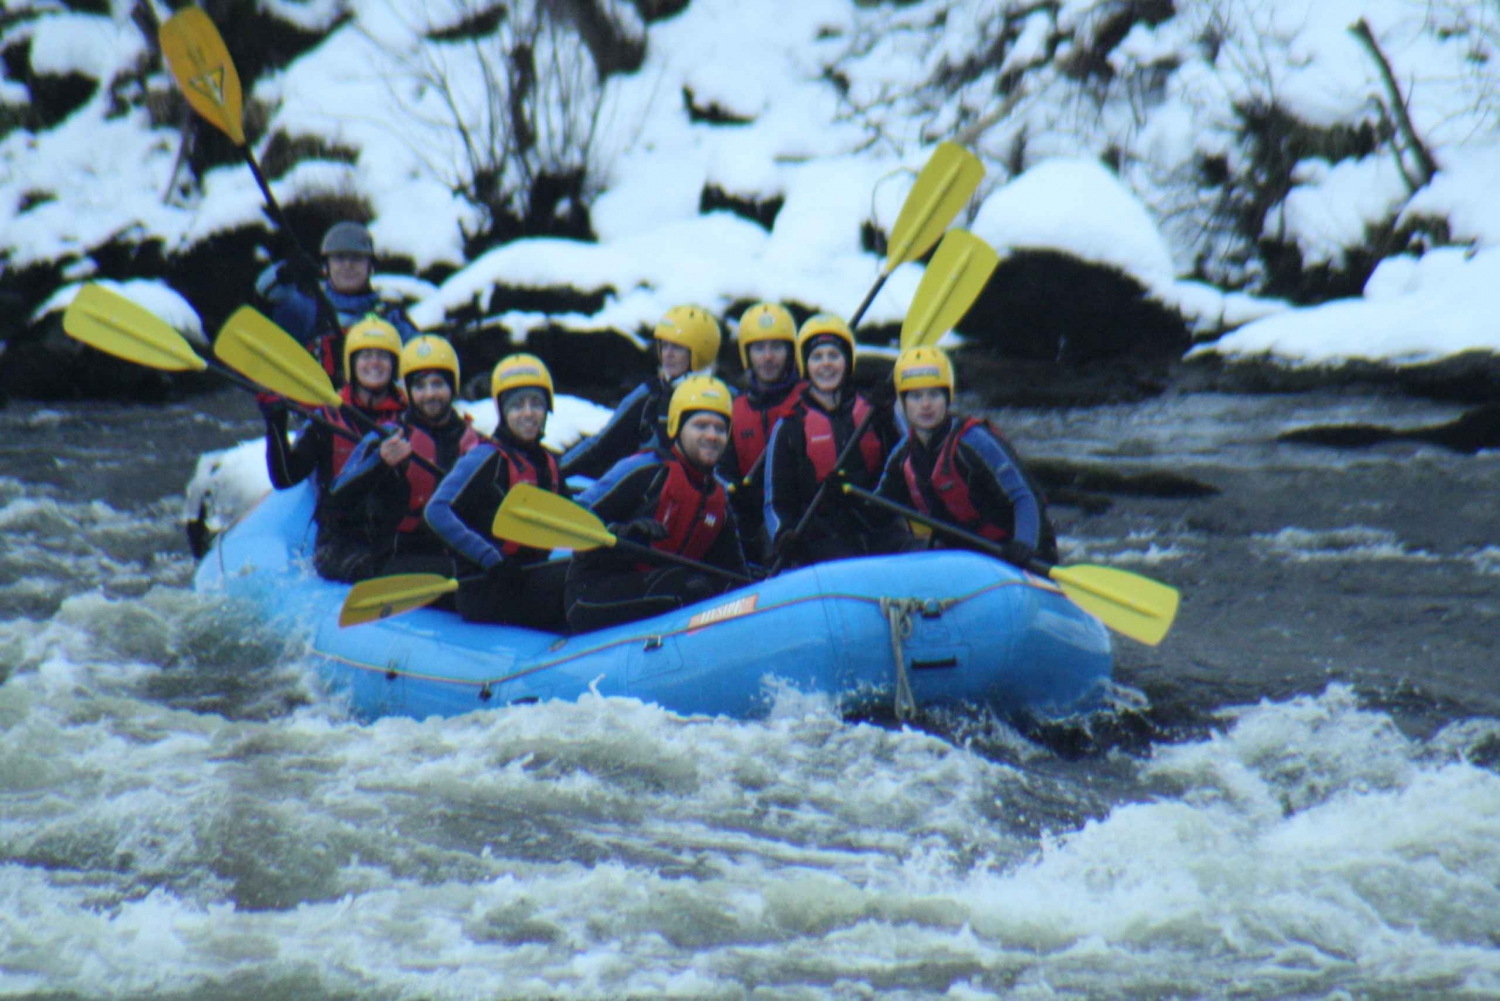 Join Splash White Water Rafting on Scotland's River Tay